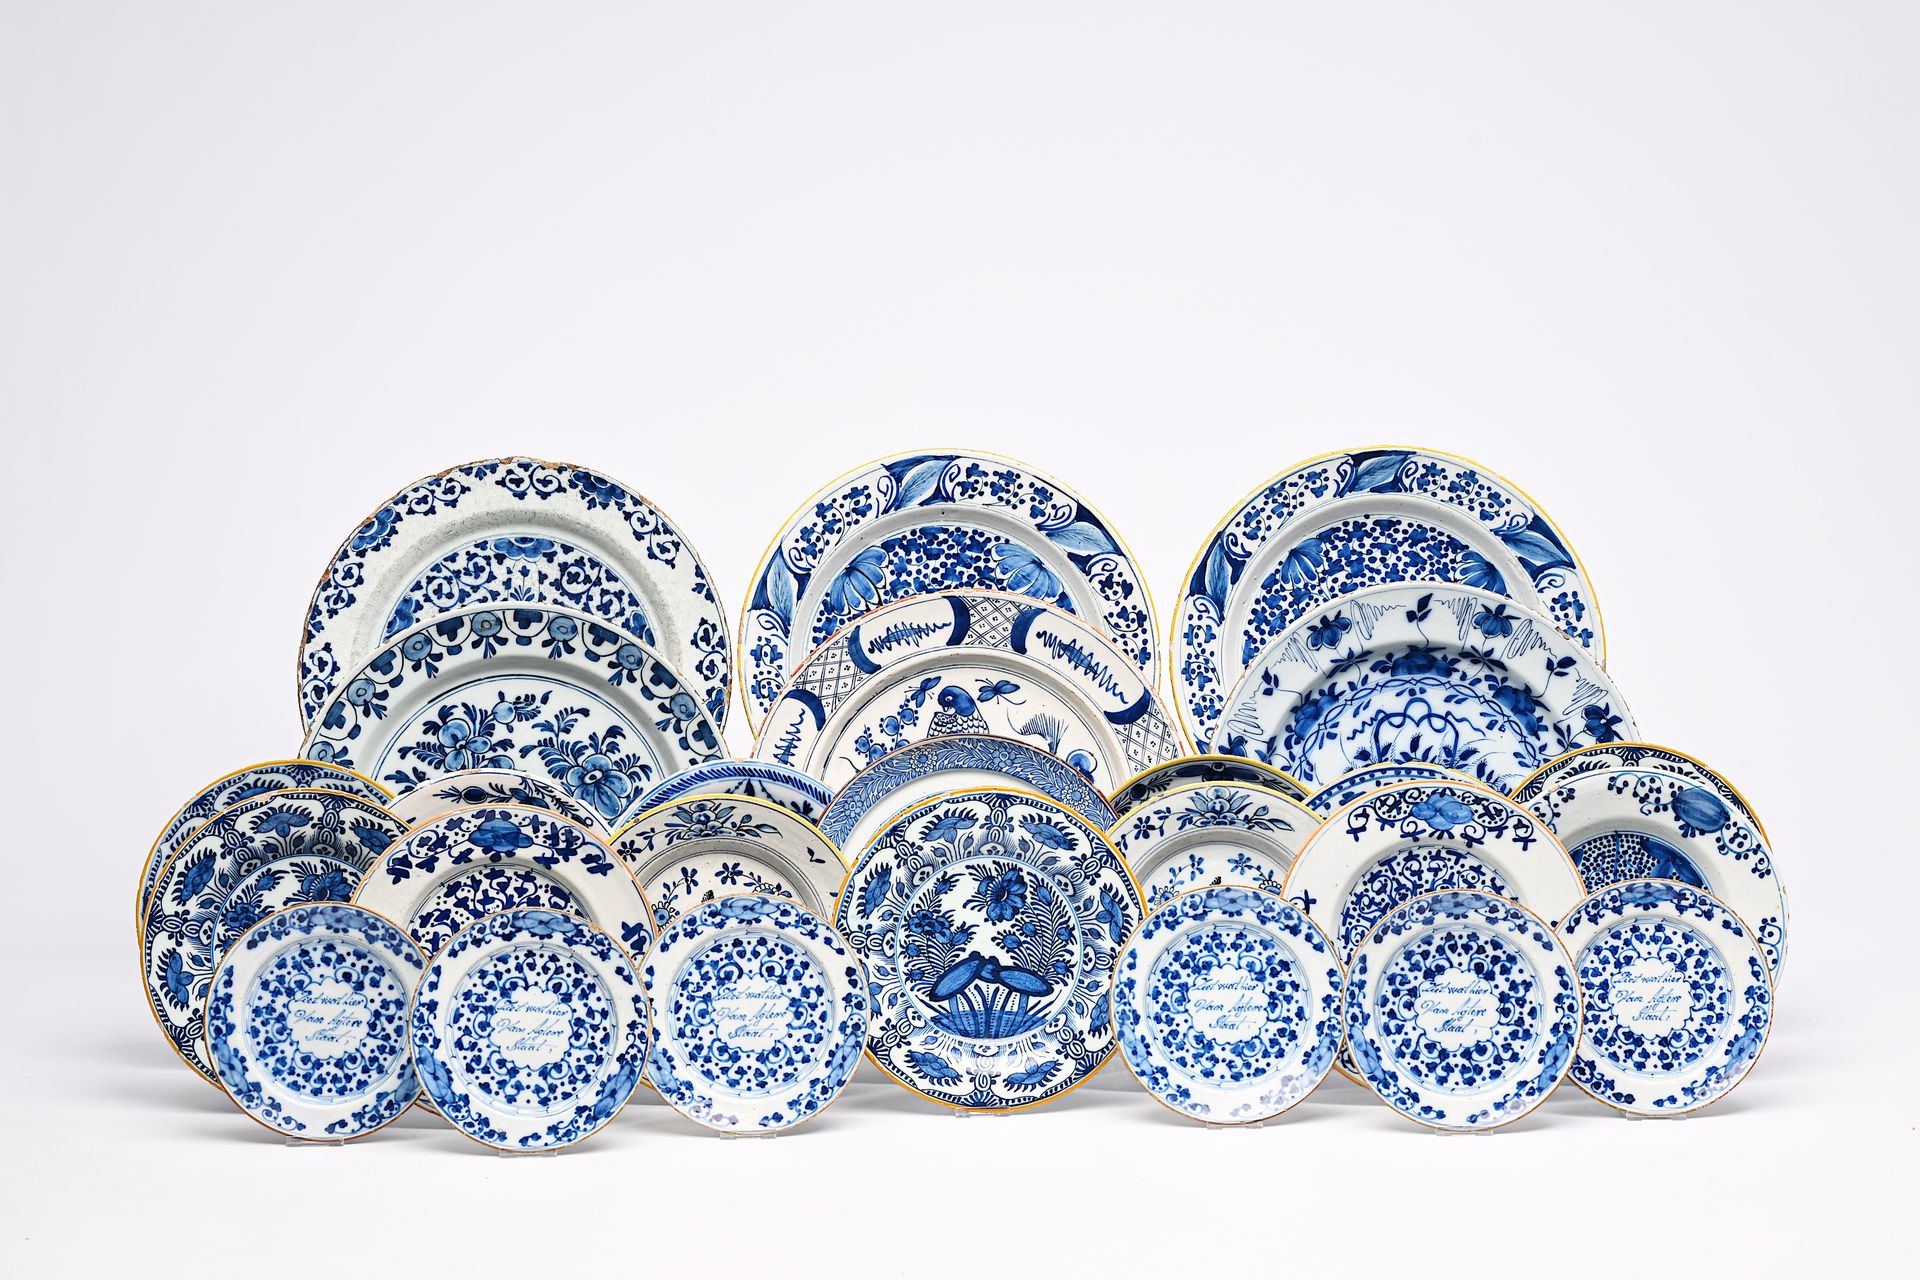 Twenty-six Dutch Delft blue and white dishes and plates, 18th C. 二十六个荷兰代尔夫特蓝白色盘子&hellip;